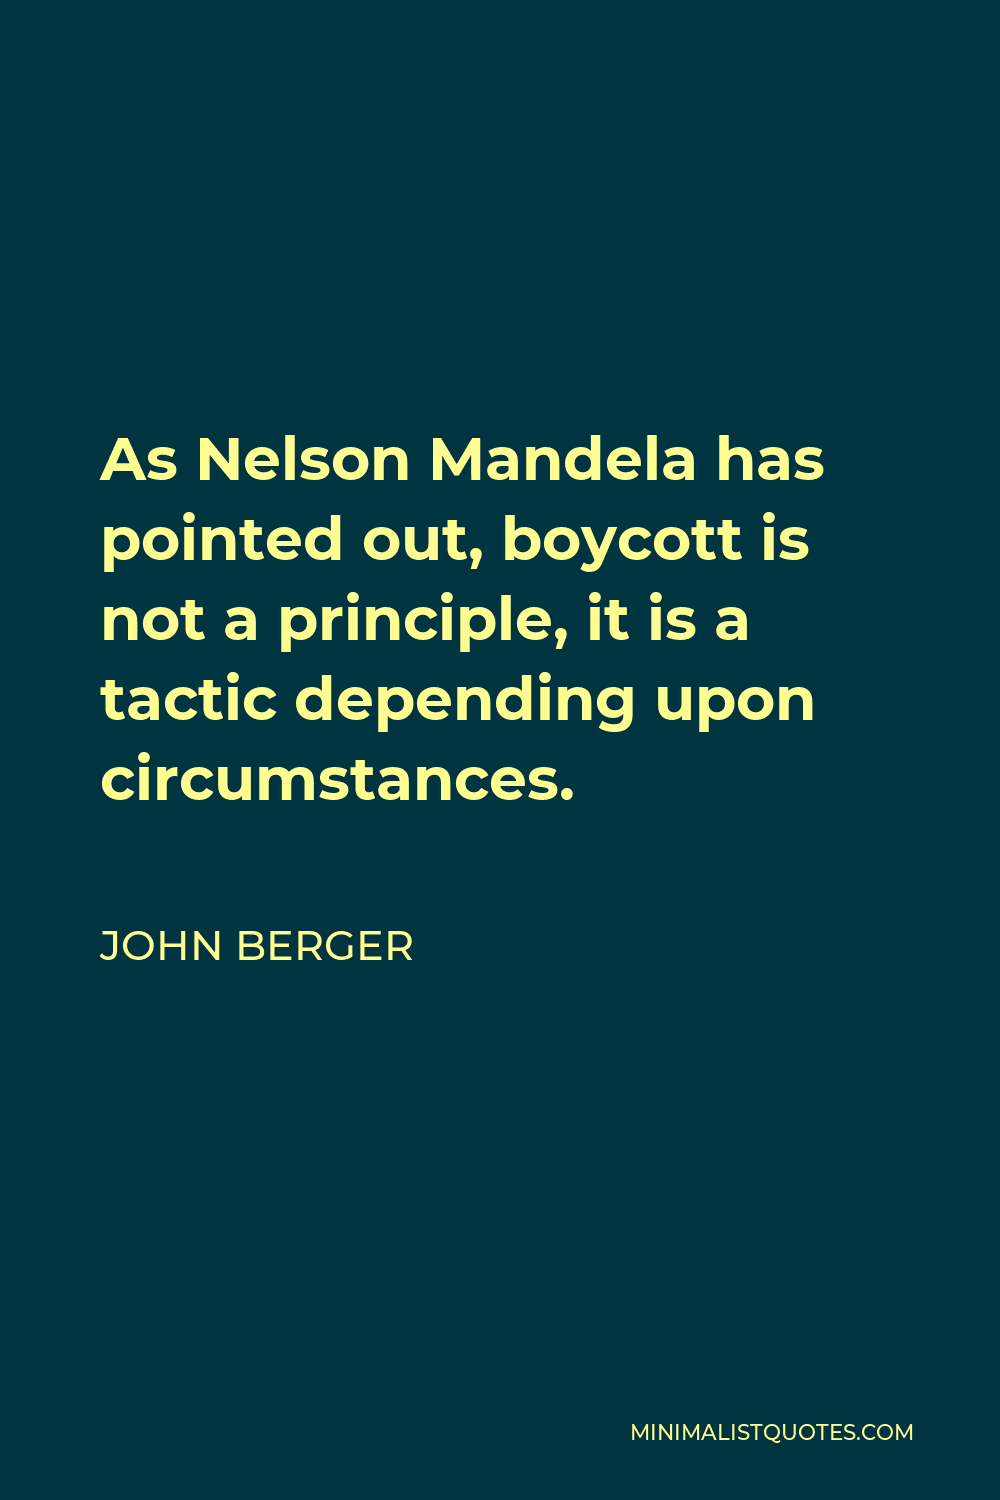 John Berger Quote - As Nelson Mandela has pointed out, boycott is not a principle, it is a tactic depending upon circumstances.